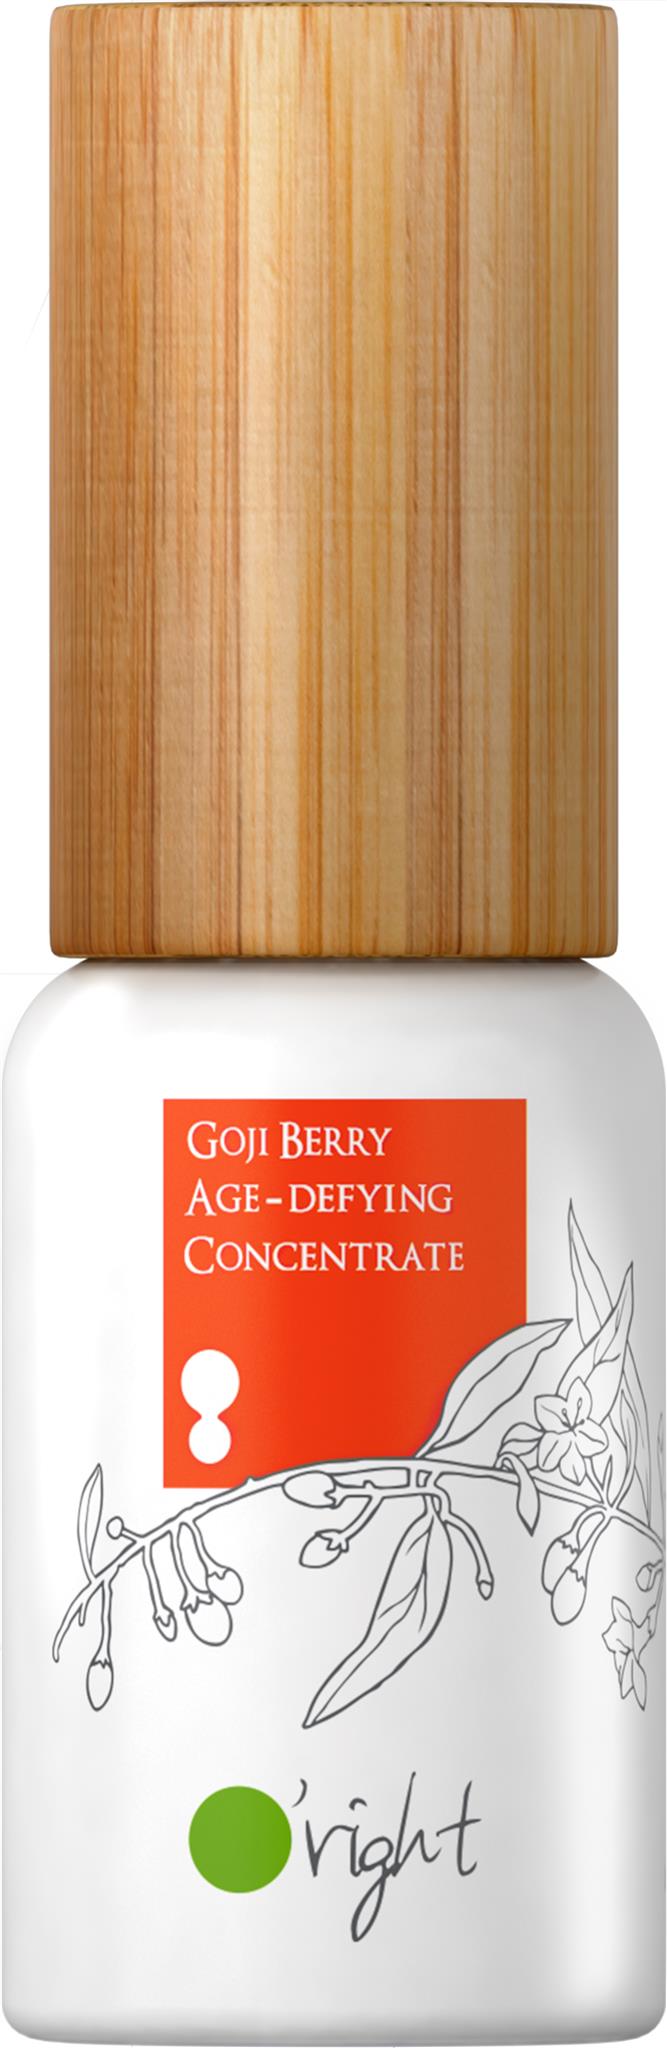 Goji Berry Age-defying Concentrate